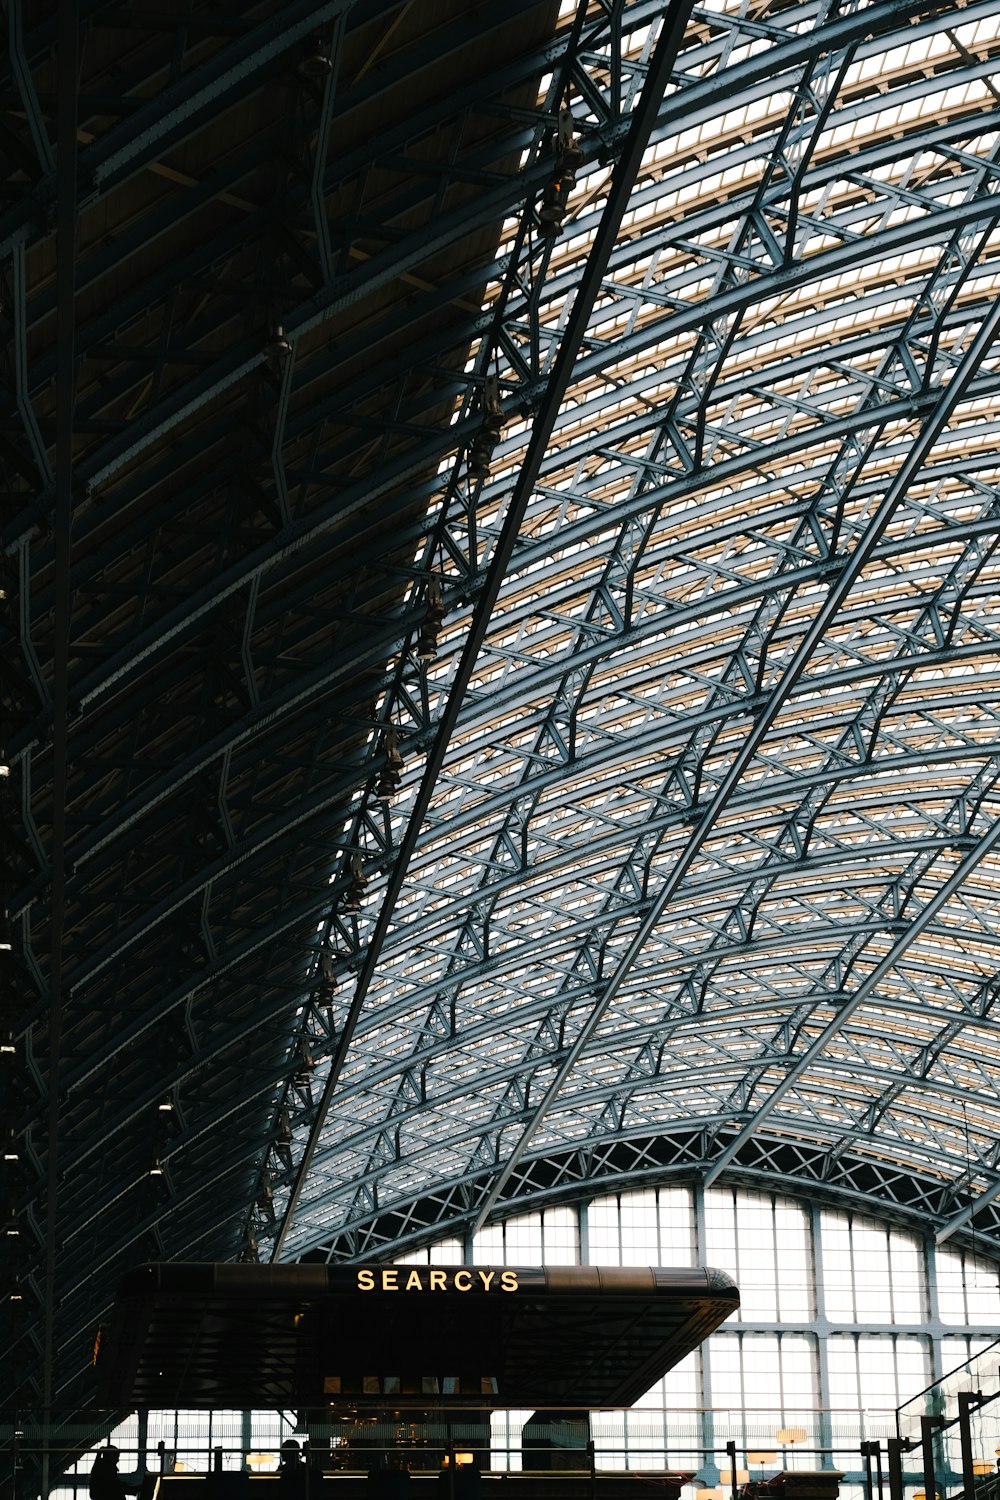 a train station with a large metal roof